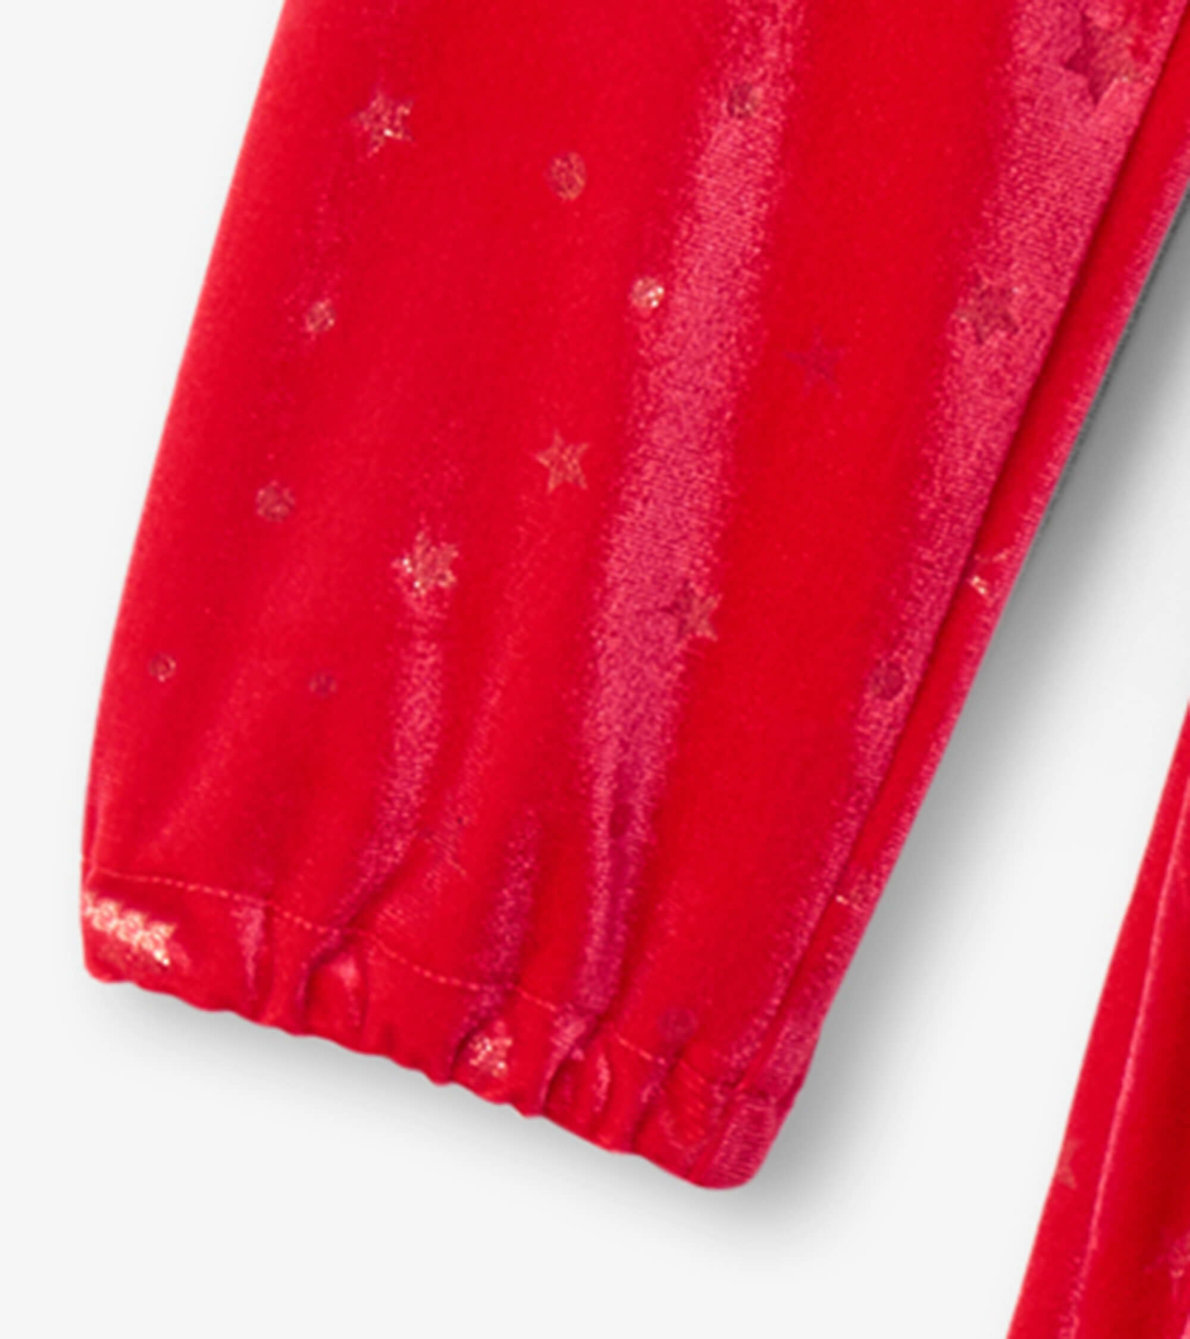 View larger image of Girls Holiday Stars Crushed Velour Dress